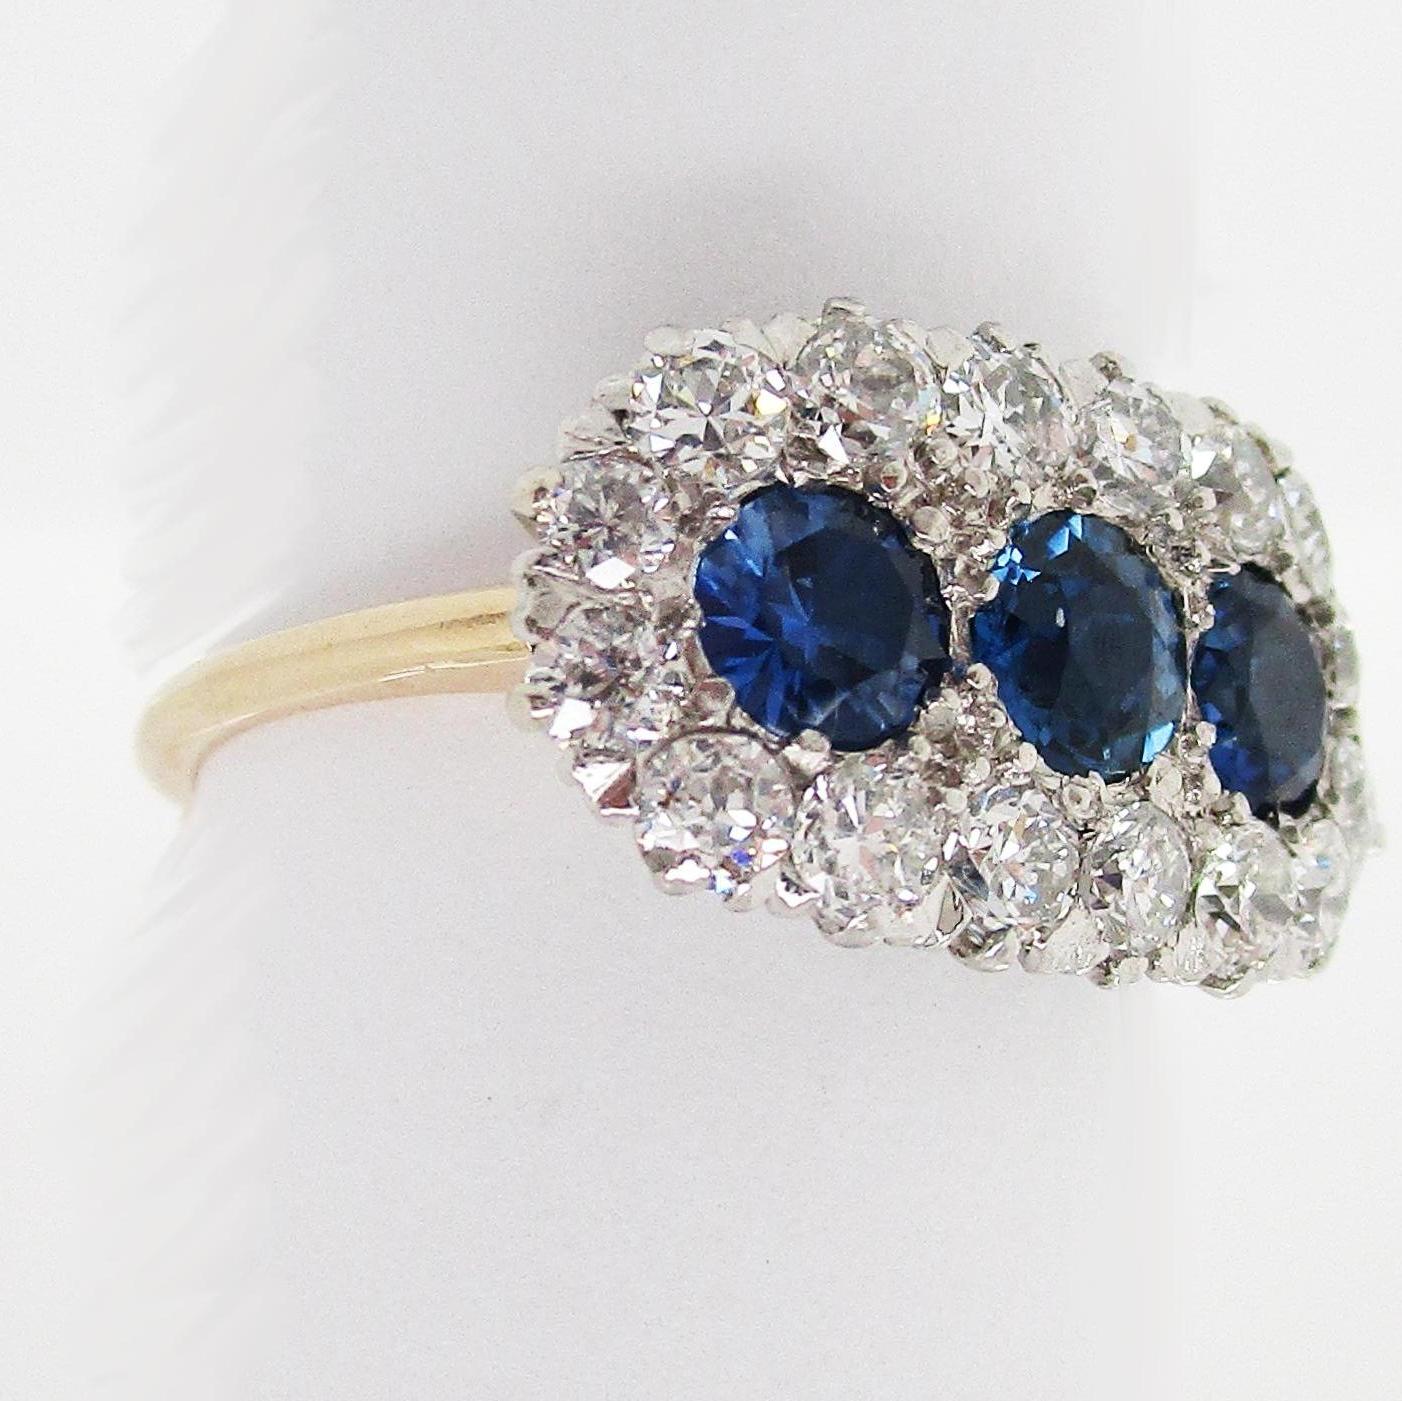 This is an absolutely breathtaking Edwardian ring in platinum and 14k yellow gold, featuring three stunning sapphires framed by a row of white old mine cut diamonds. This ring has a stunning unique layout and a gorgeous overall look! The ring has a